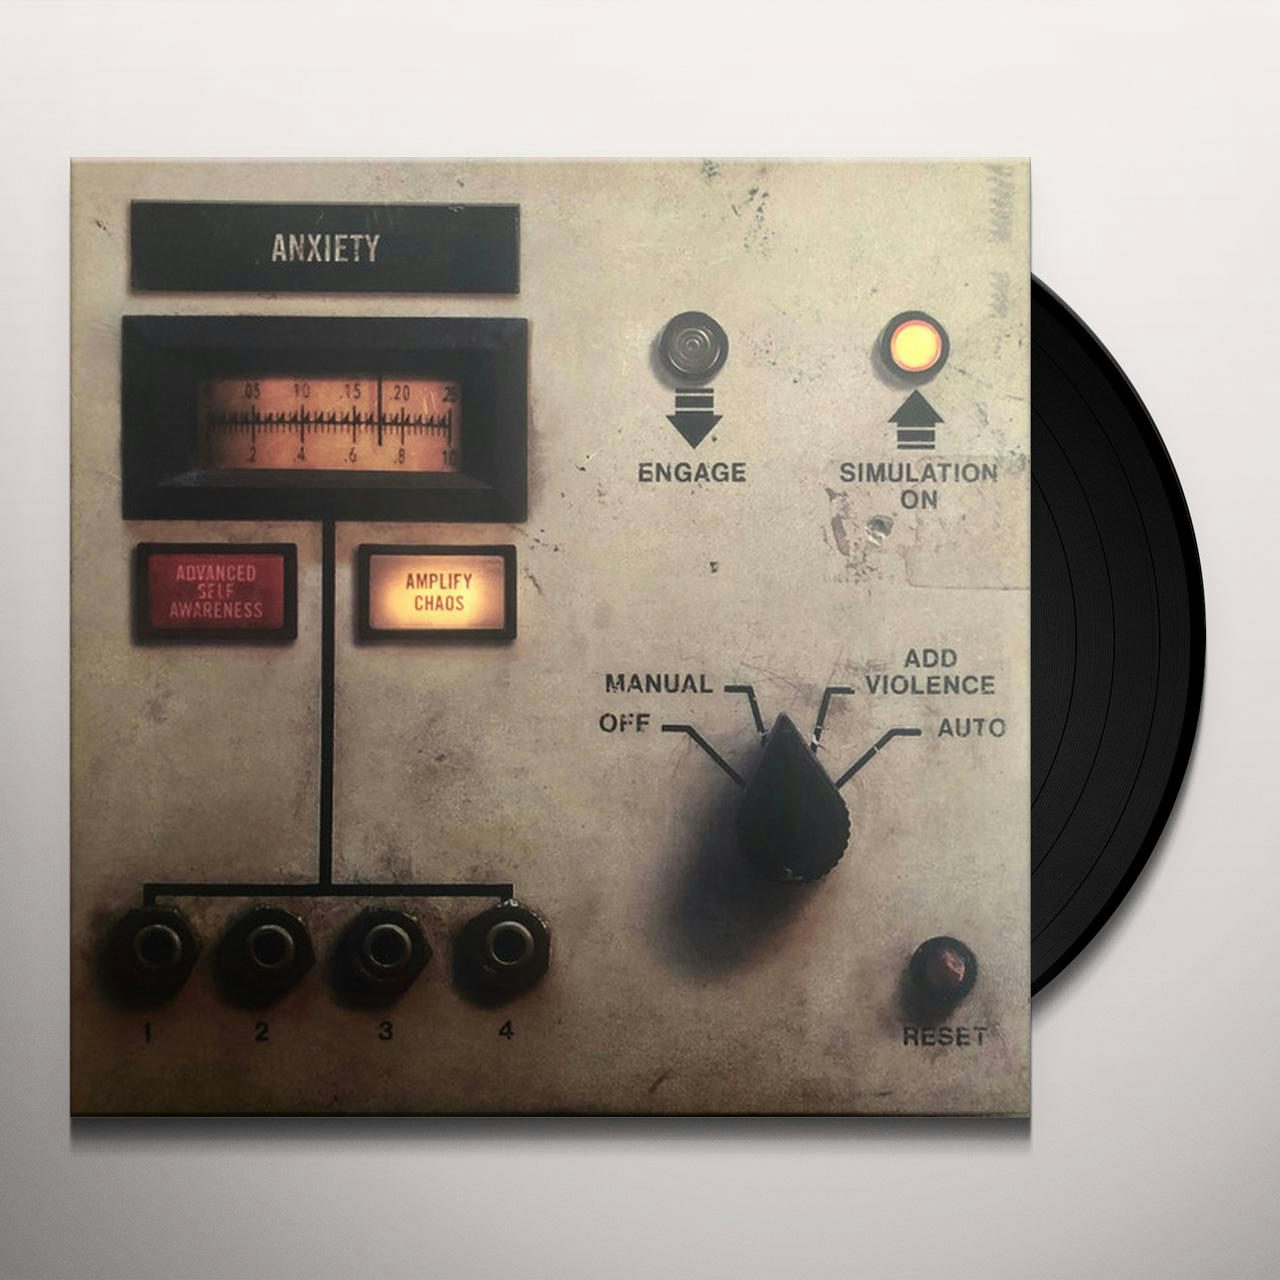 Nine Inch Nails announce new album 'Bad Witch' - The Rockpit